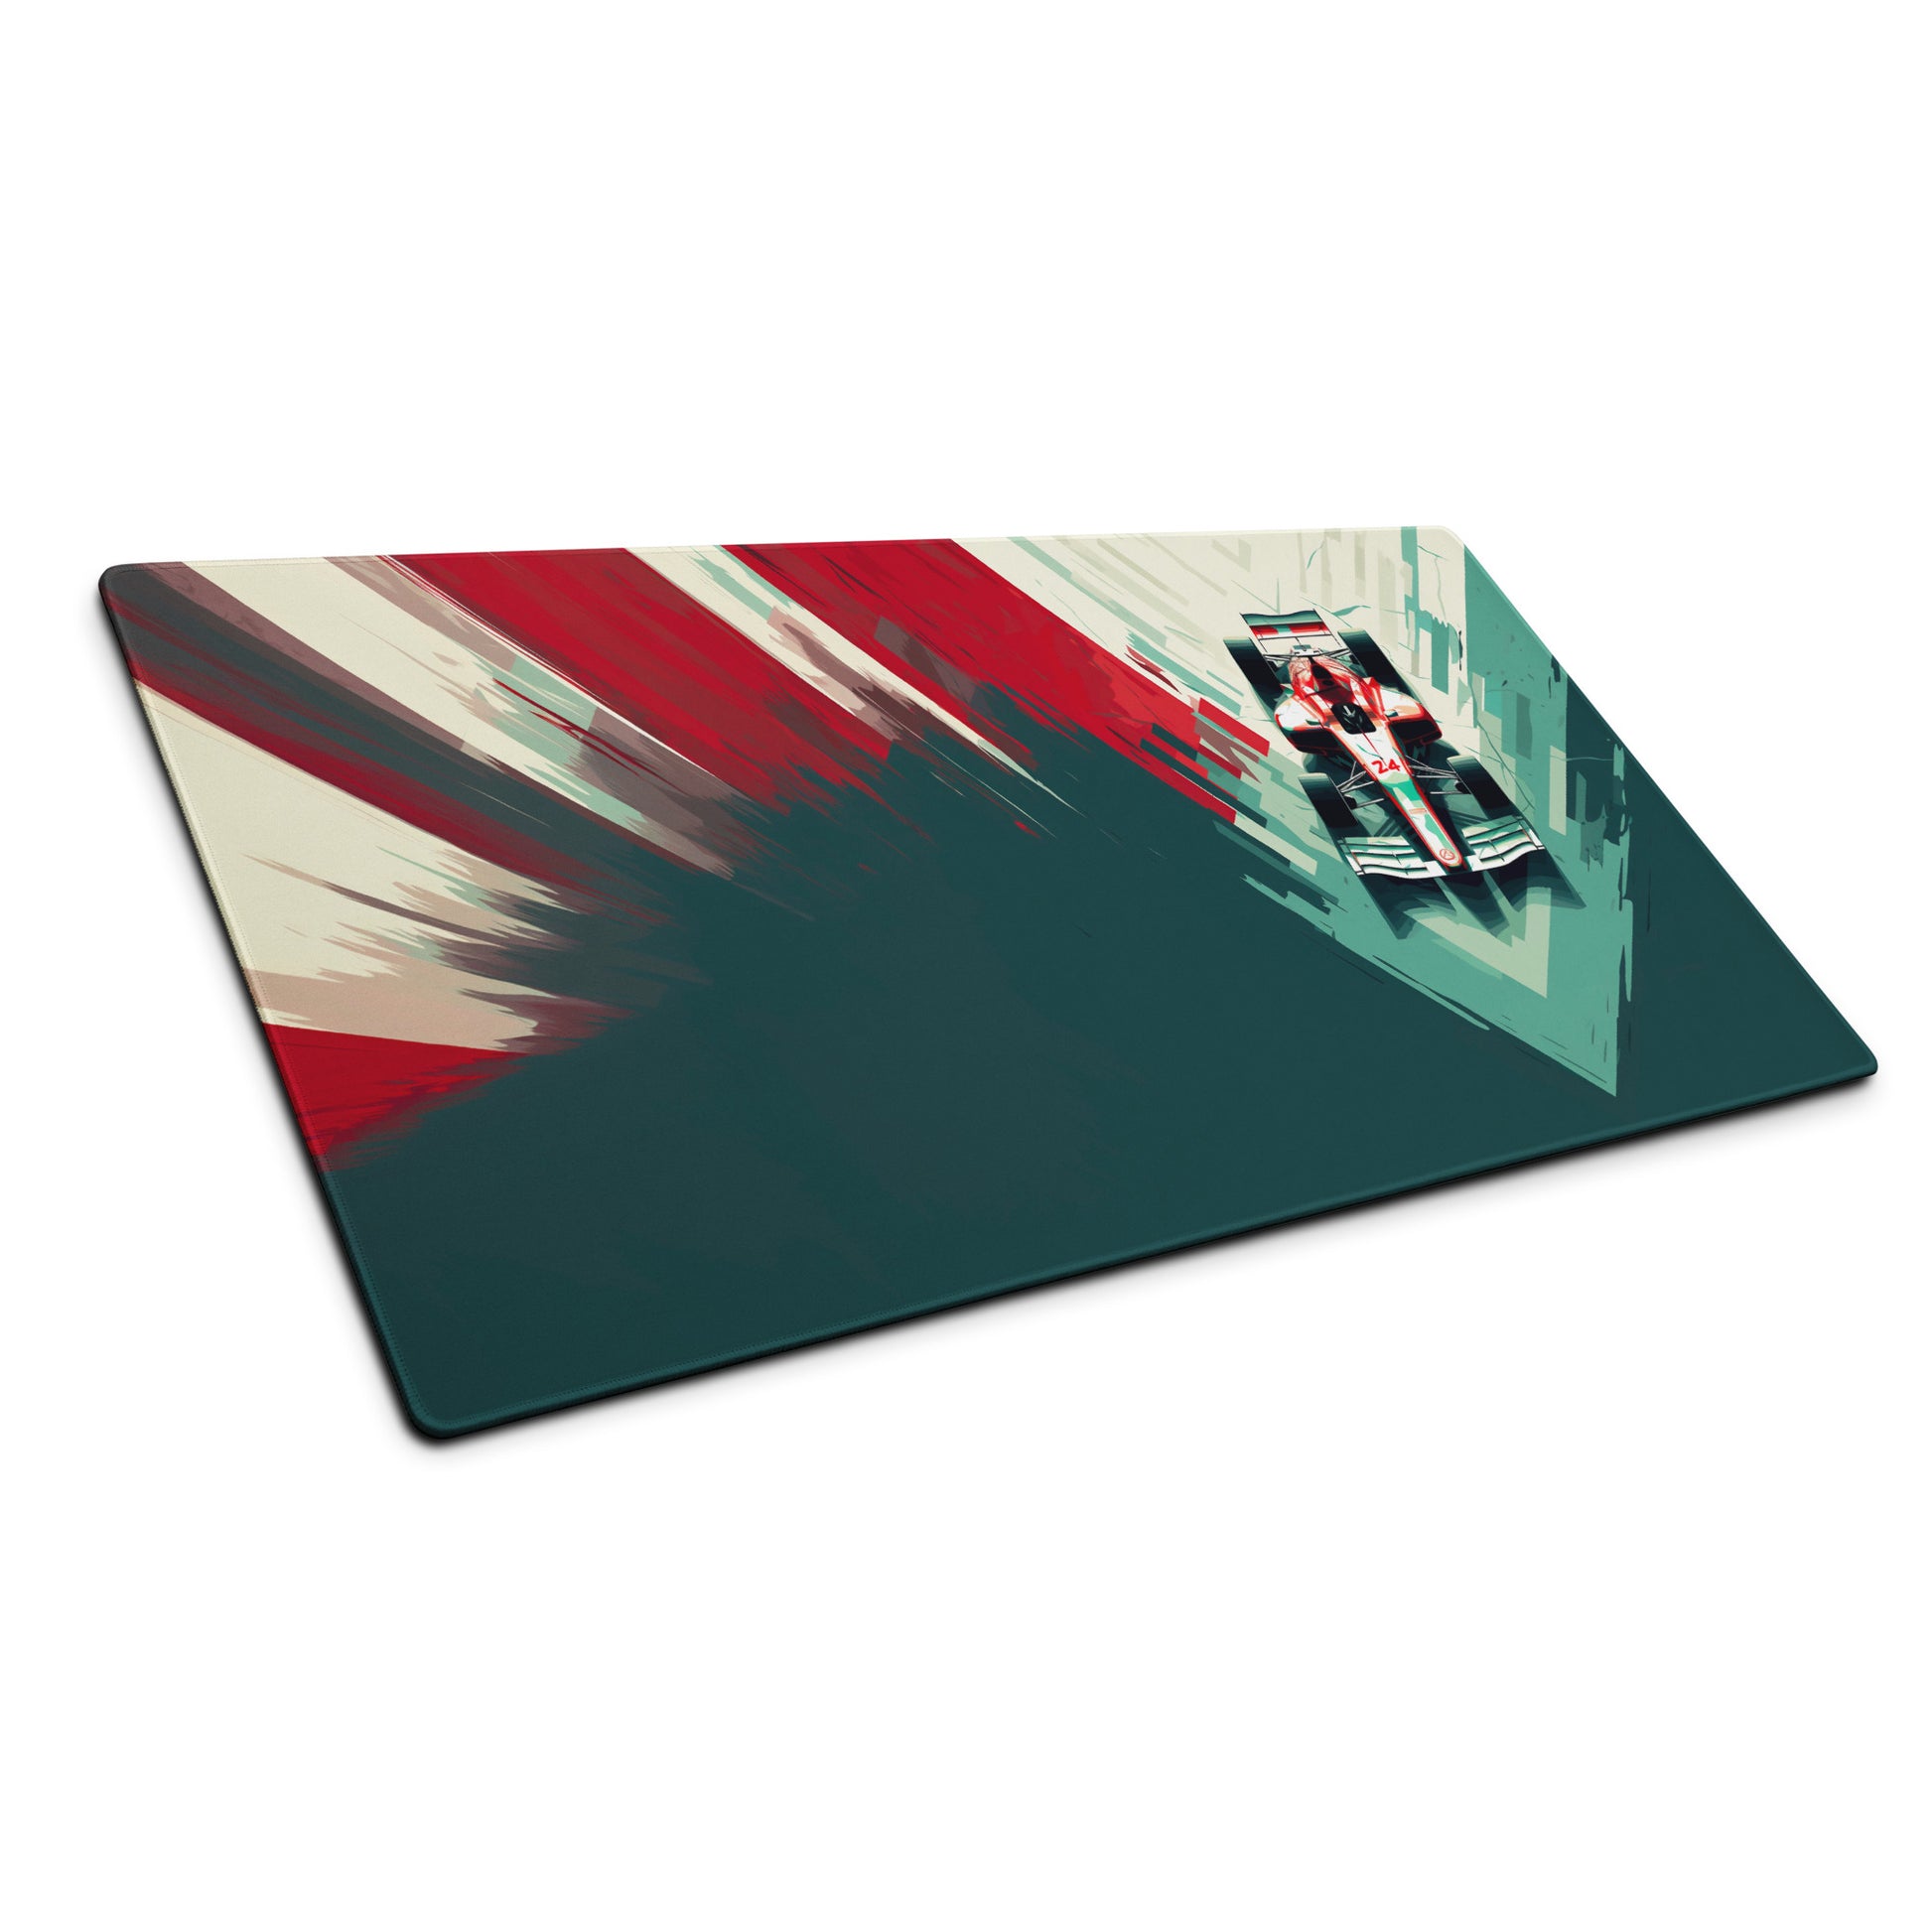 A 36" x 18" teal, red, and white desk pad with a formula one car on the right sitting at an angle.